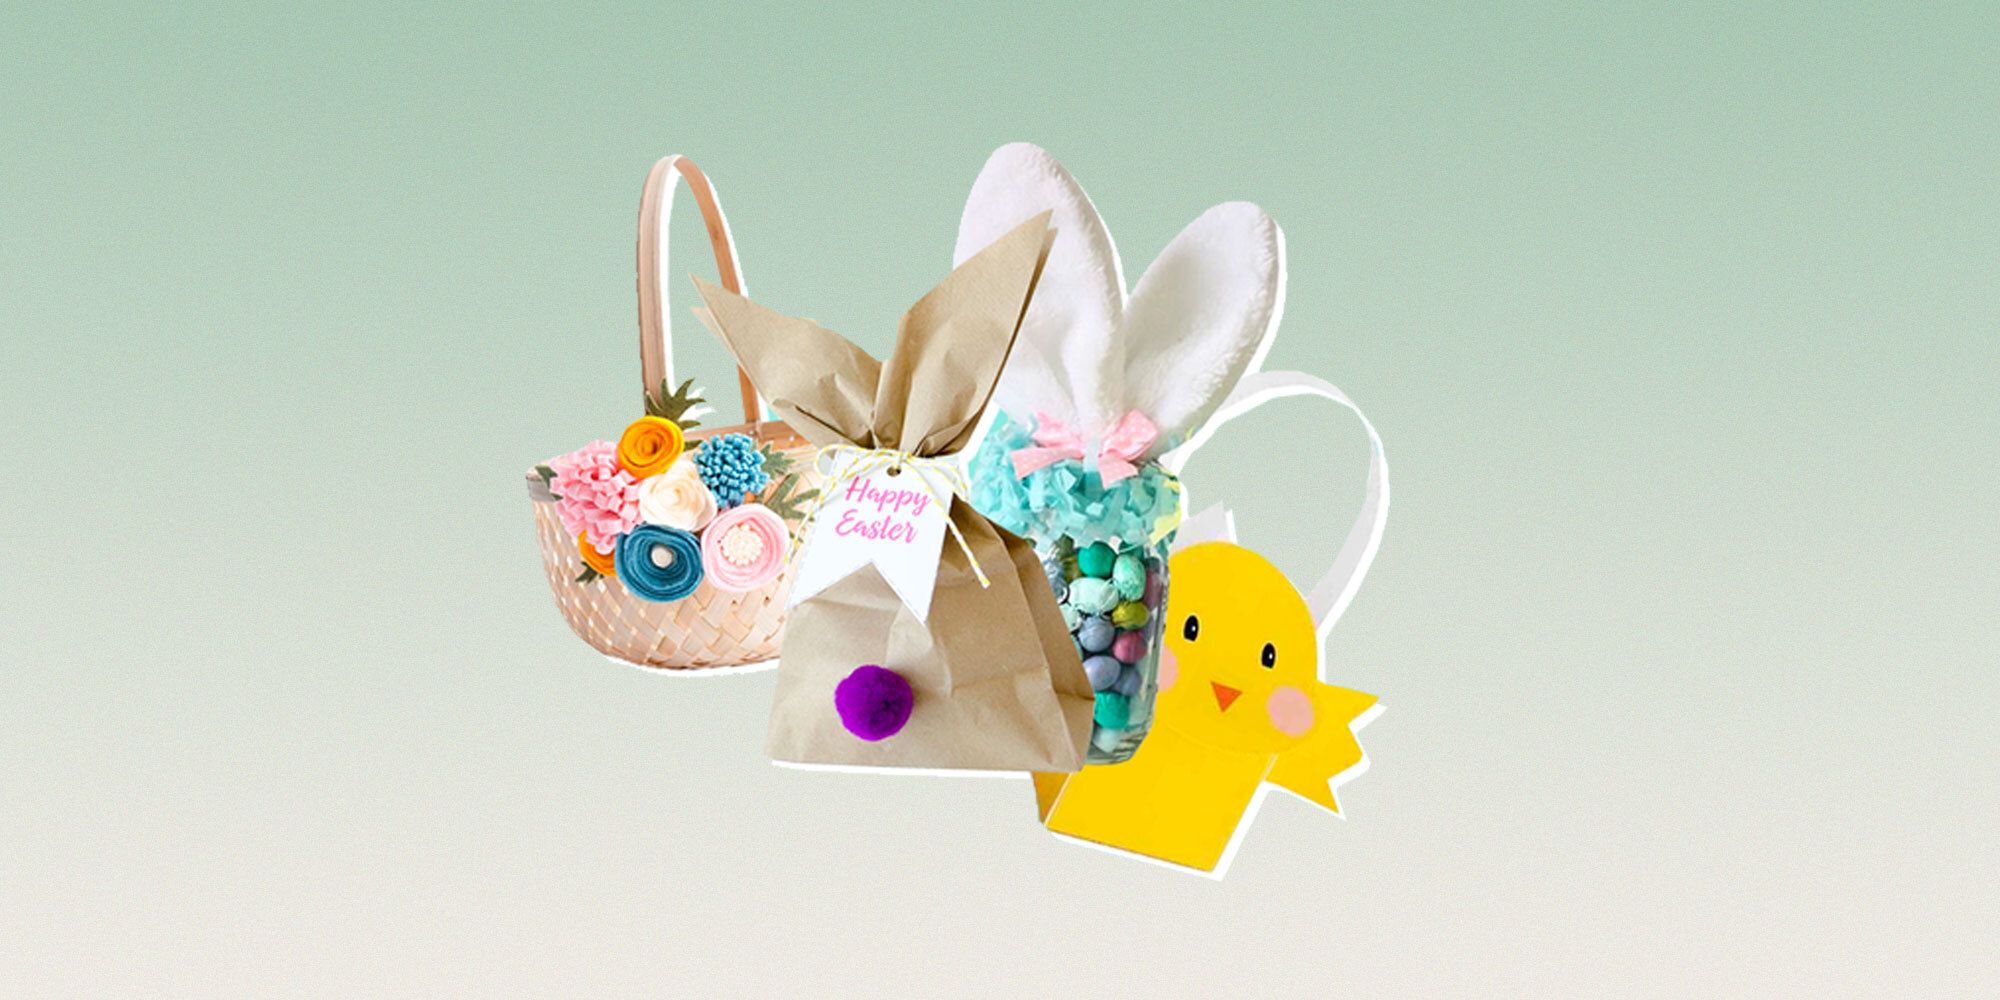 12 Boxes Party Favors for Kids Prizes Mini Animals Building Blocks Sets for Goodie Bags Easter Basket Stuffers